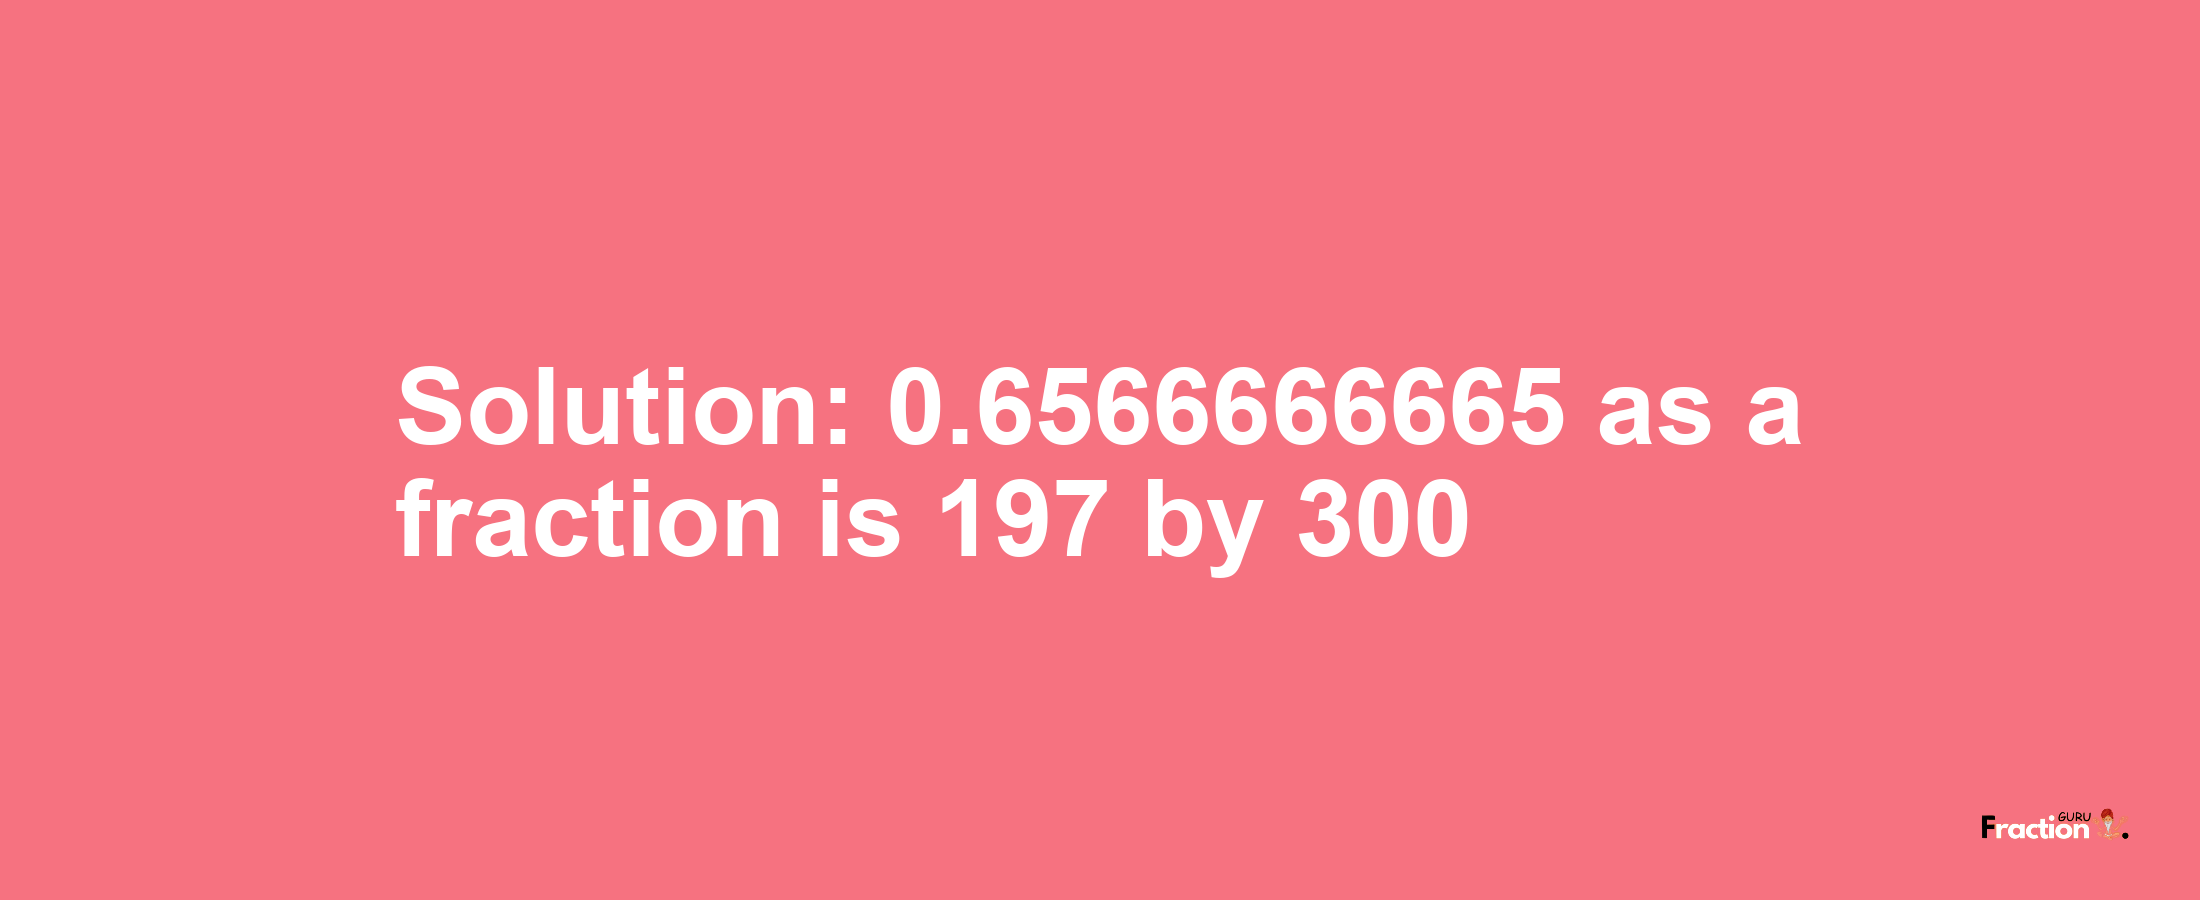 Solution:0.6566666665 as a fraction is 197/300